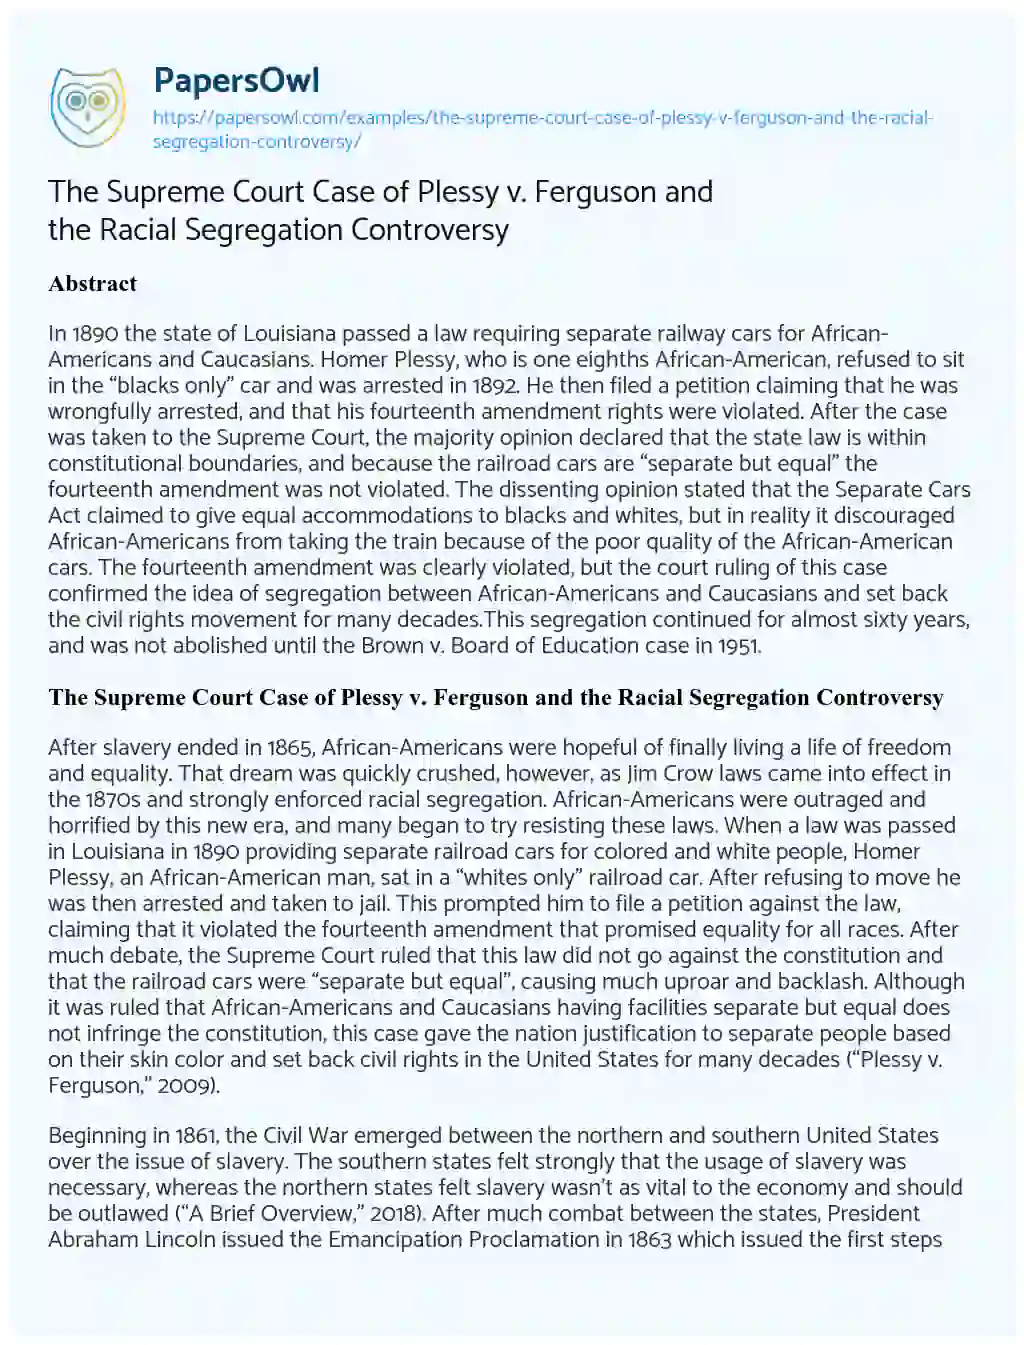 Essay on The Supreme Court Case of Plessy V. Ferguson and the Racial Segregation Controversy